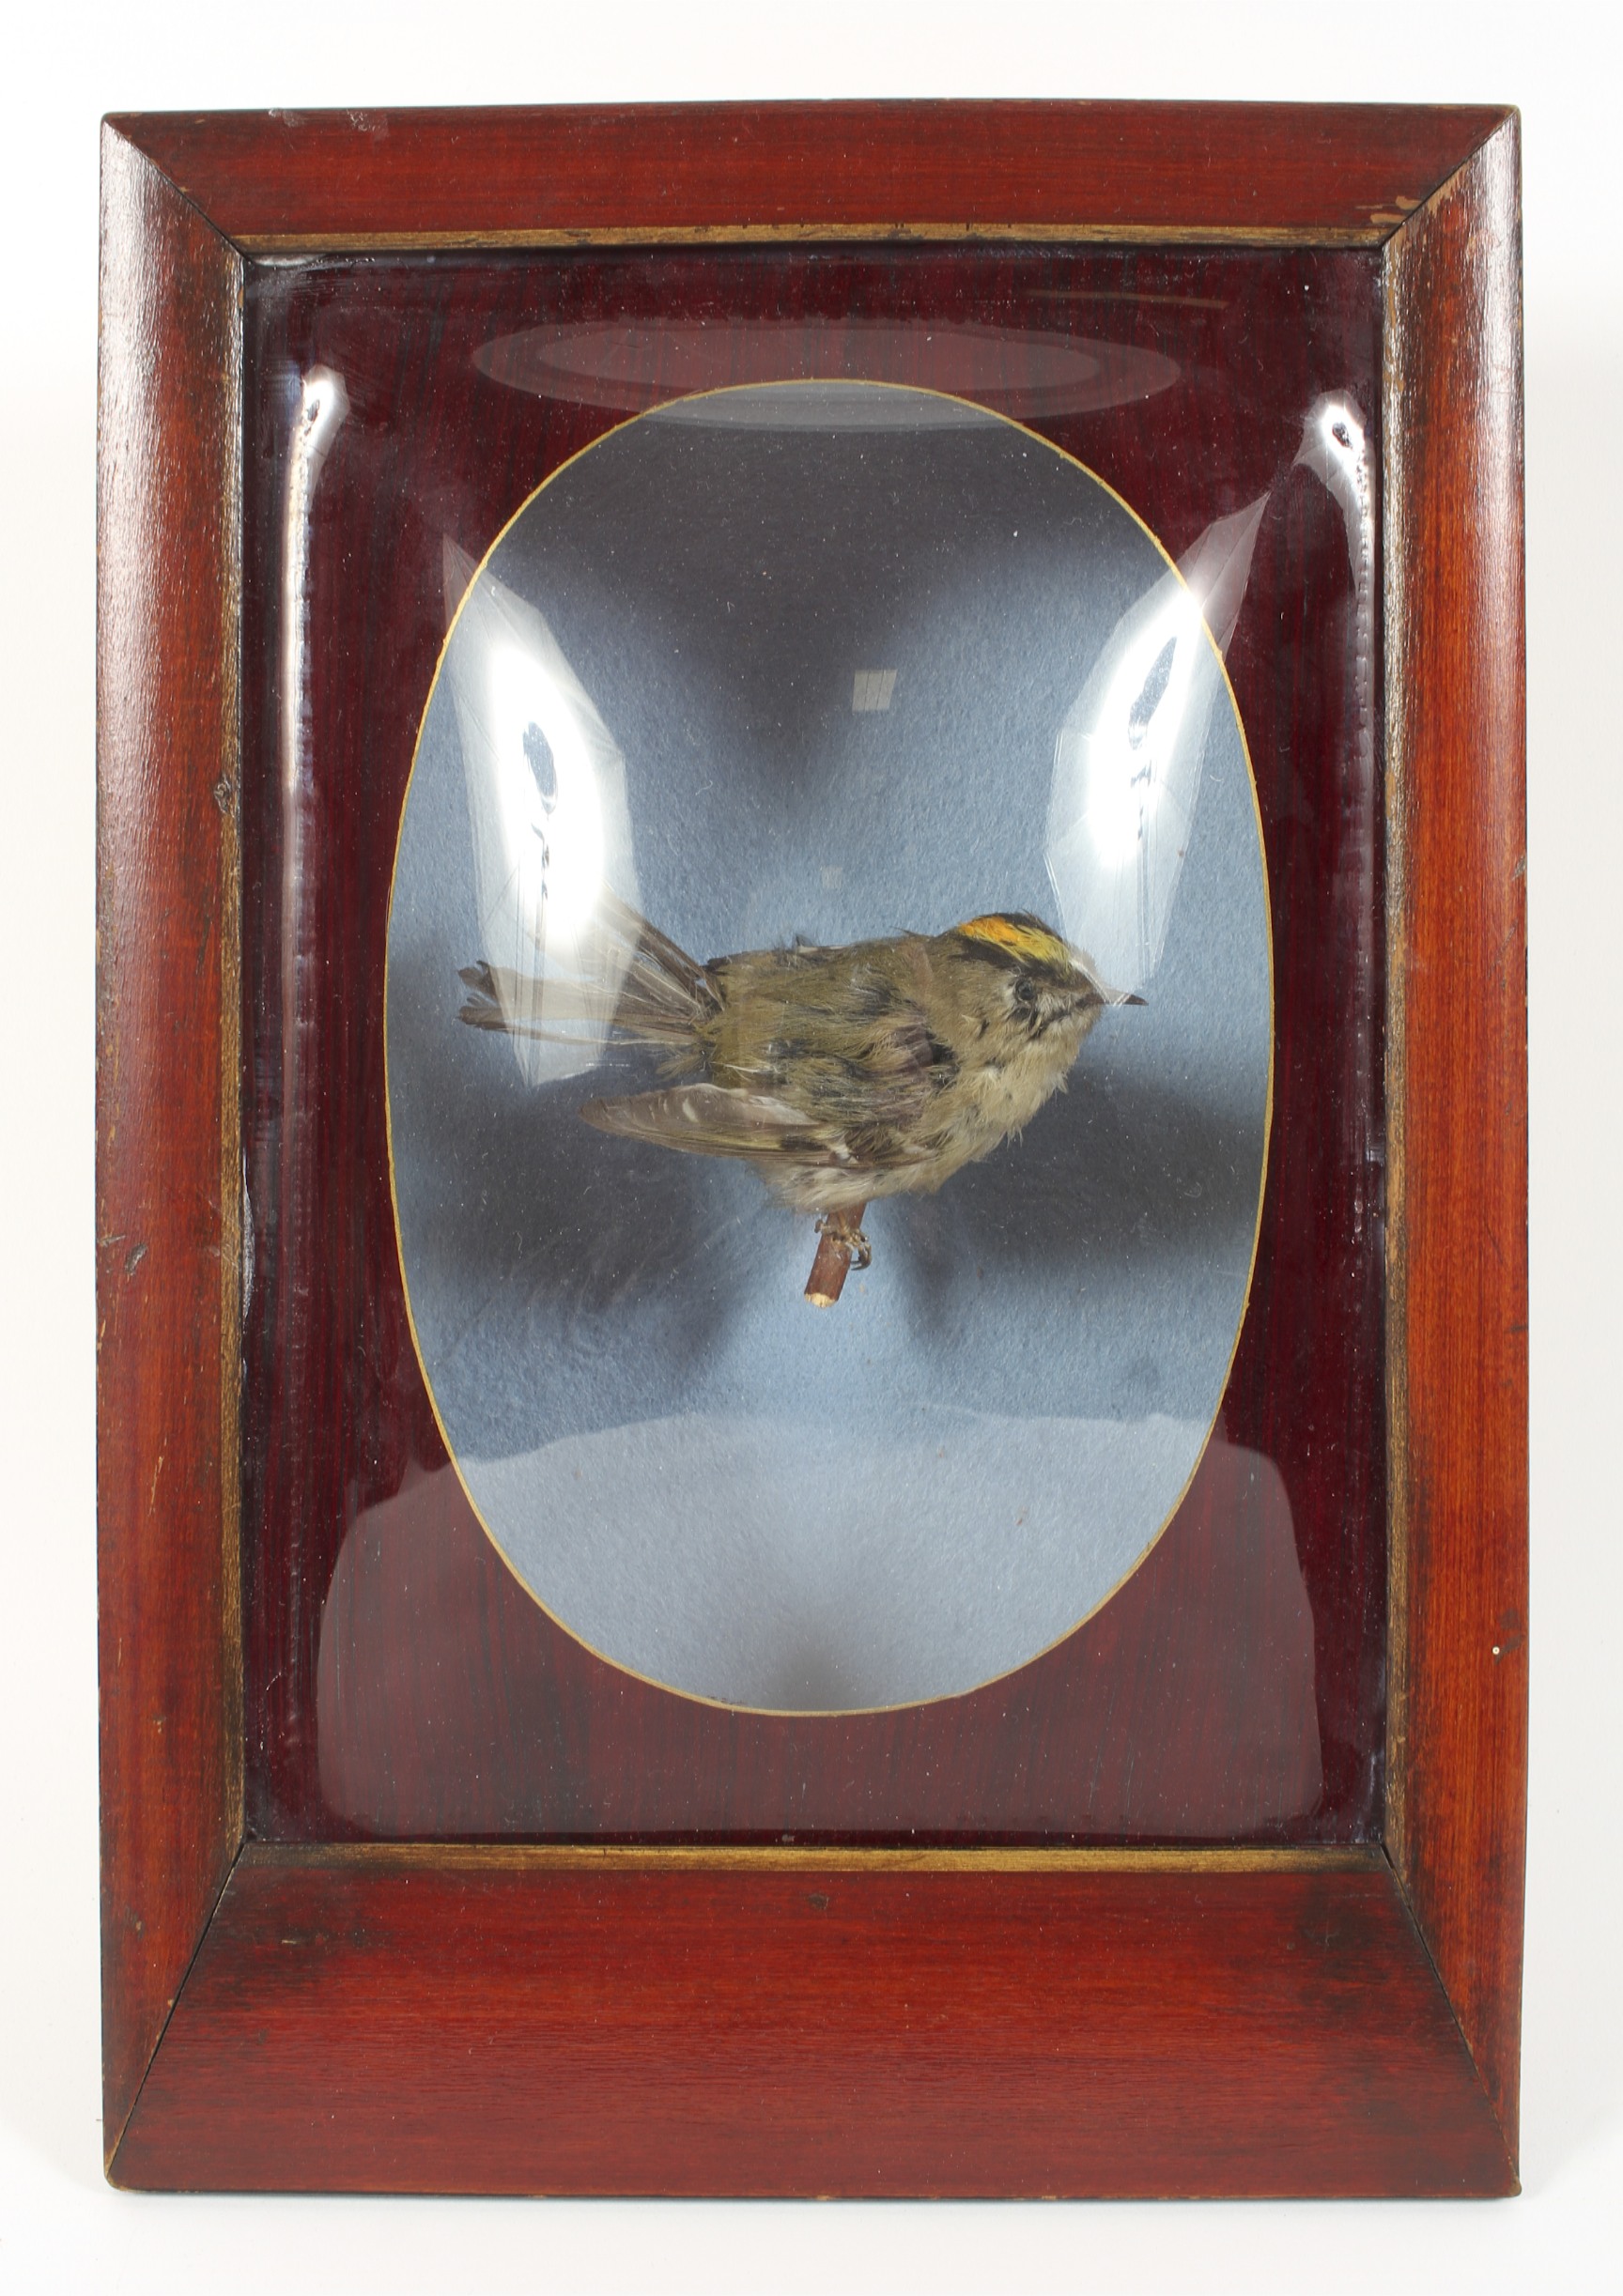 A taxidermy study of a gold crest set in a wooden case